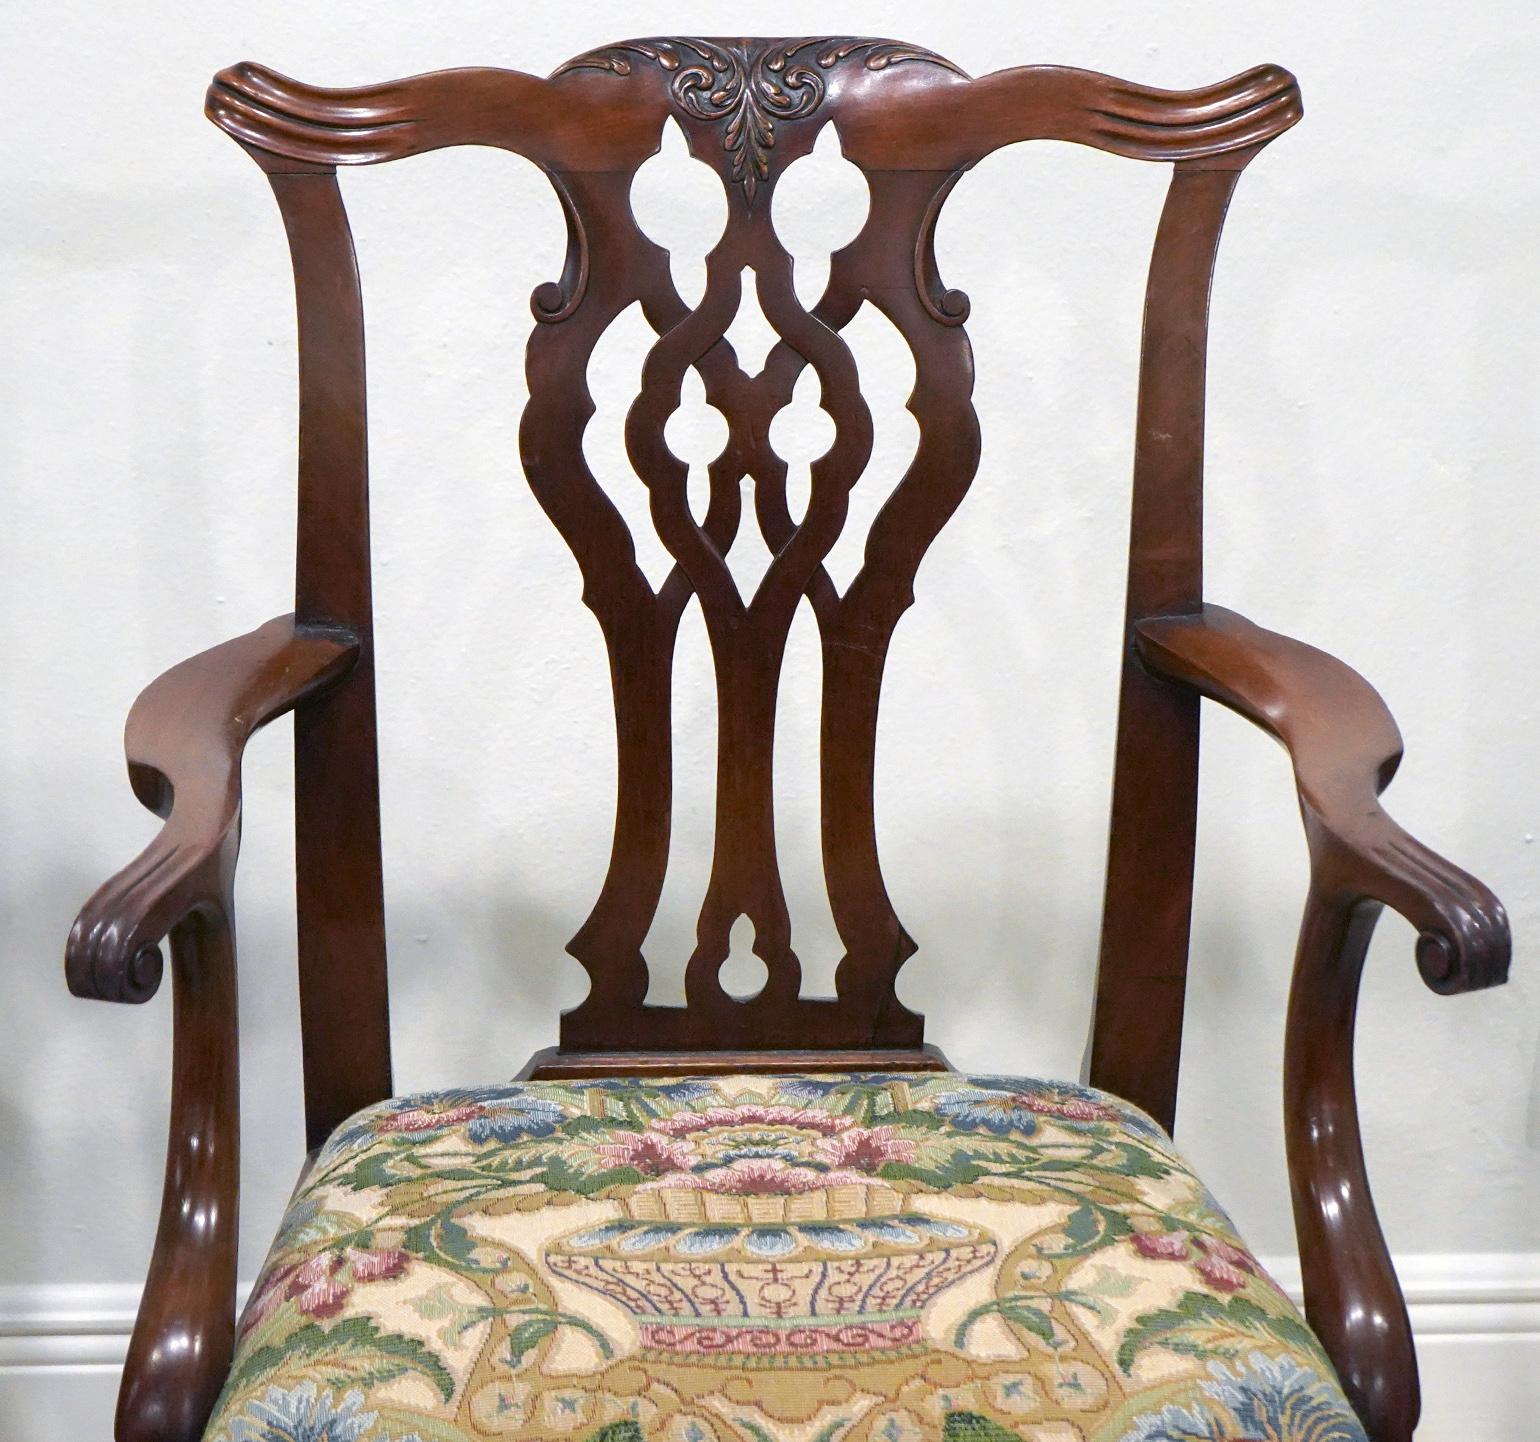 Raised on four square molded legs the rear legs back swept, these stairs feature a seat later recovered with Gobelin style fabric. A great choice. The carved and curved armrests, the fretwork style splat and the carved crest rail are in the